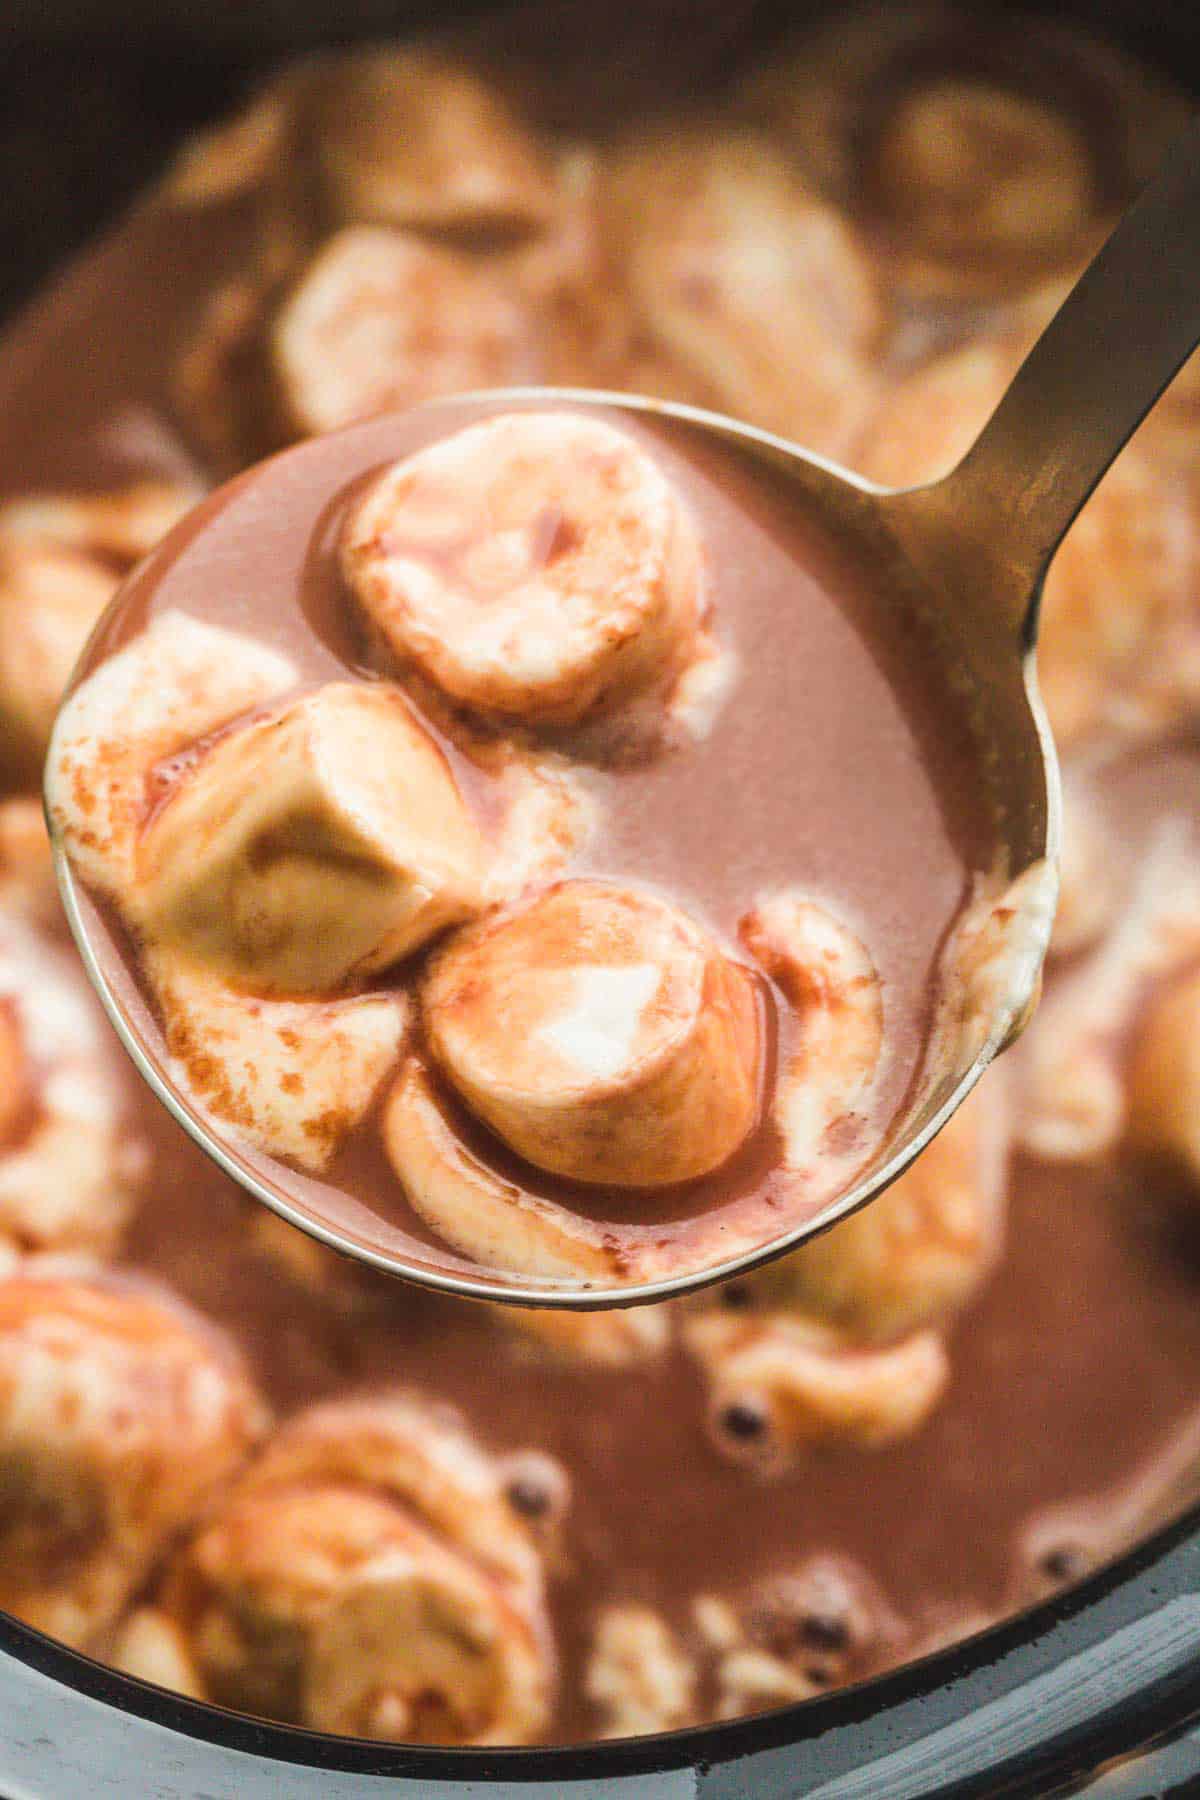 A stainless steel ladle with hot chocolate and melted marshmallows